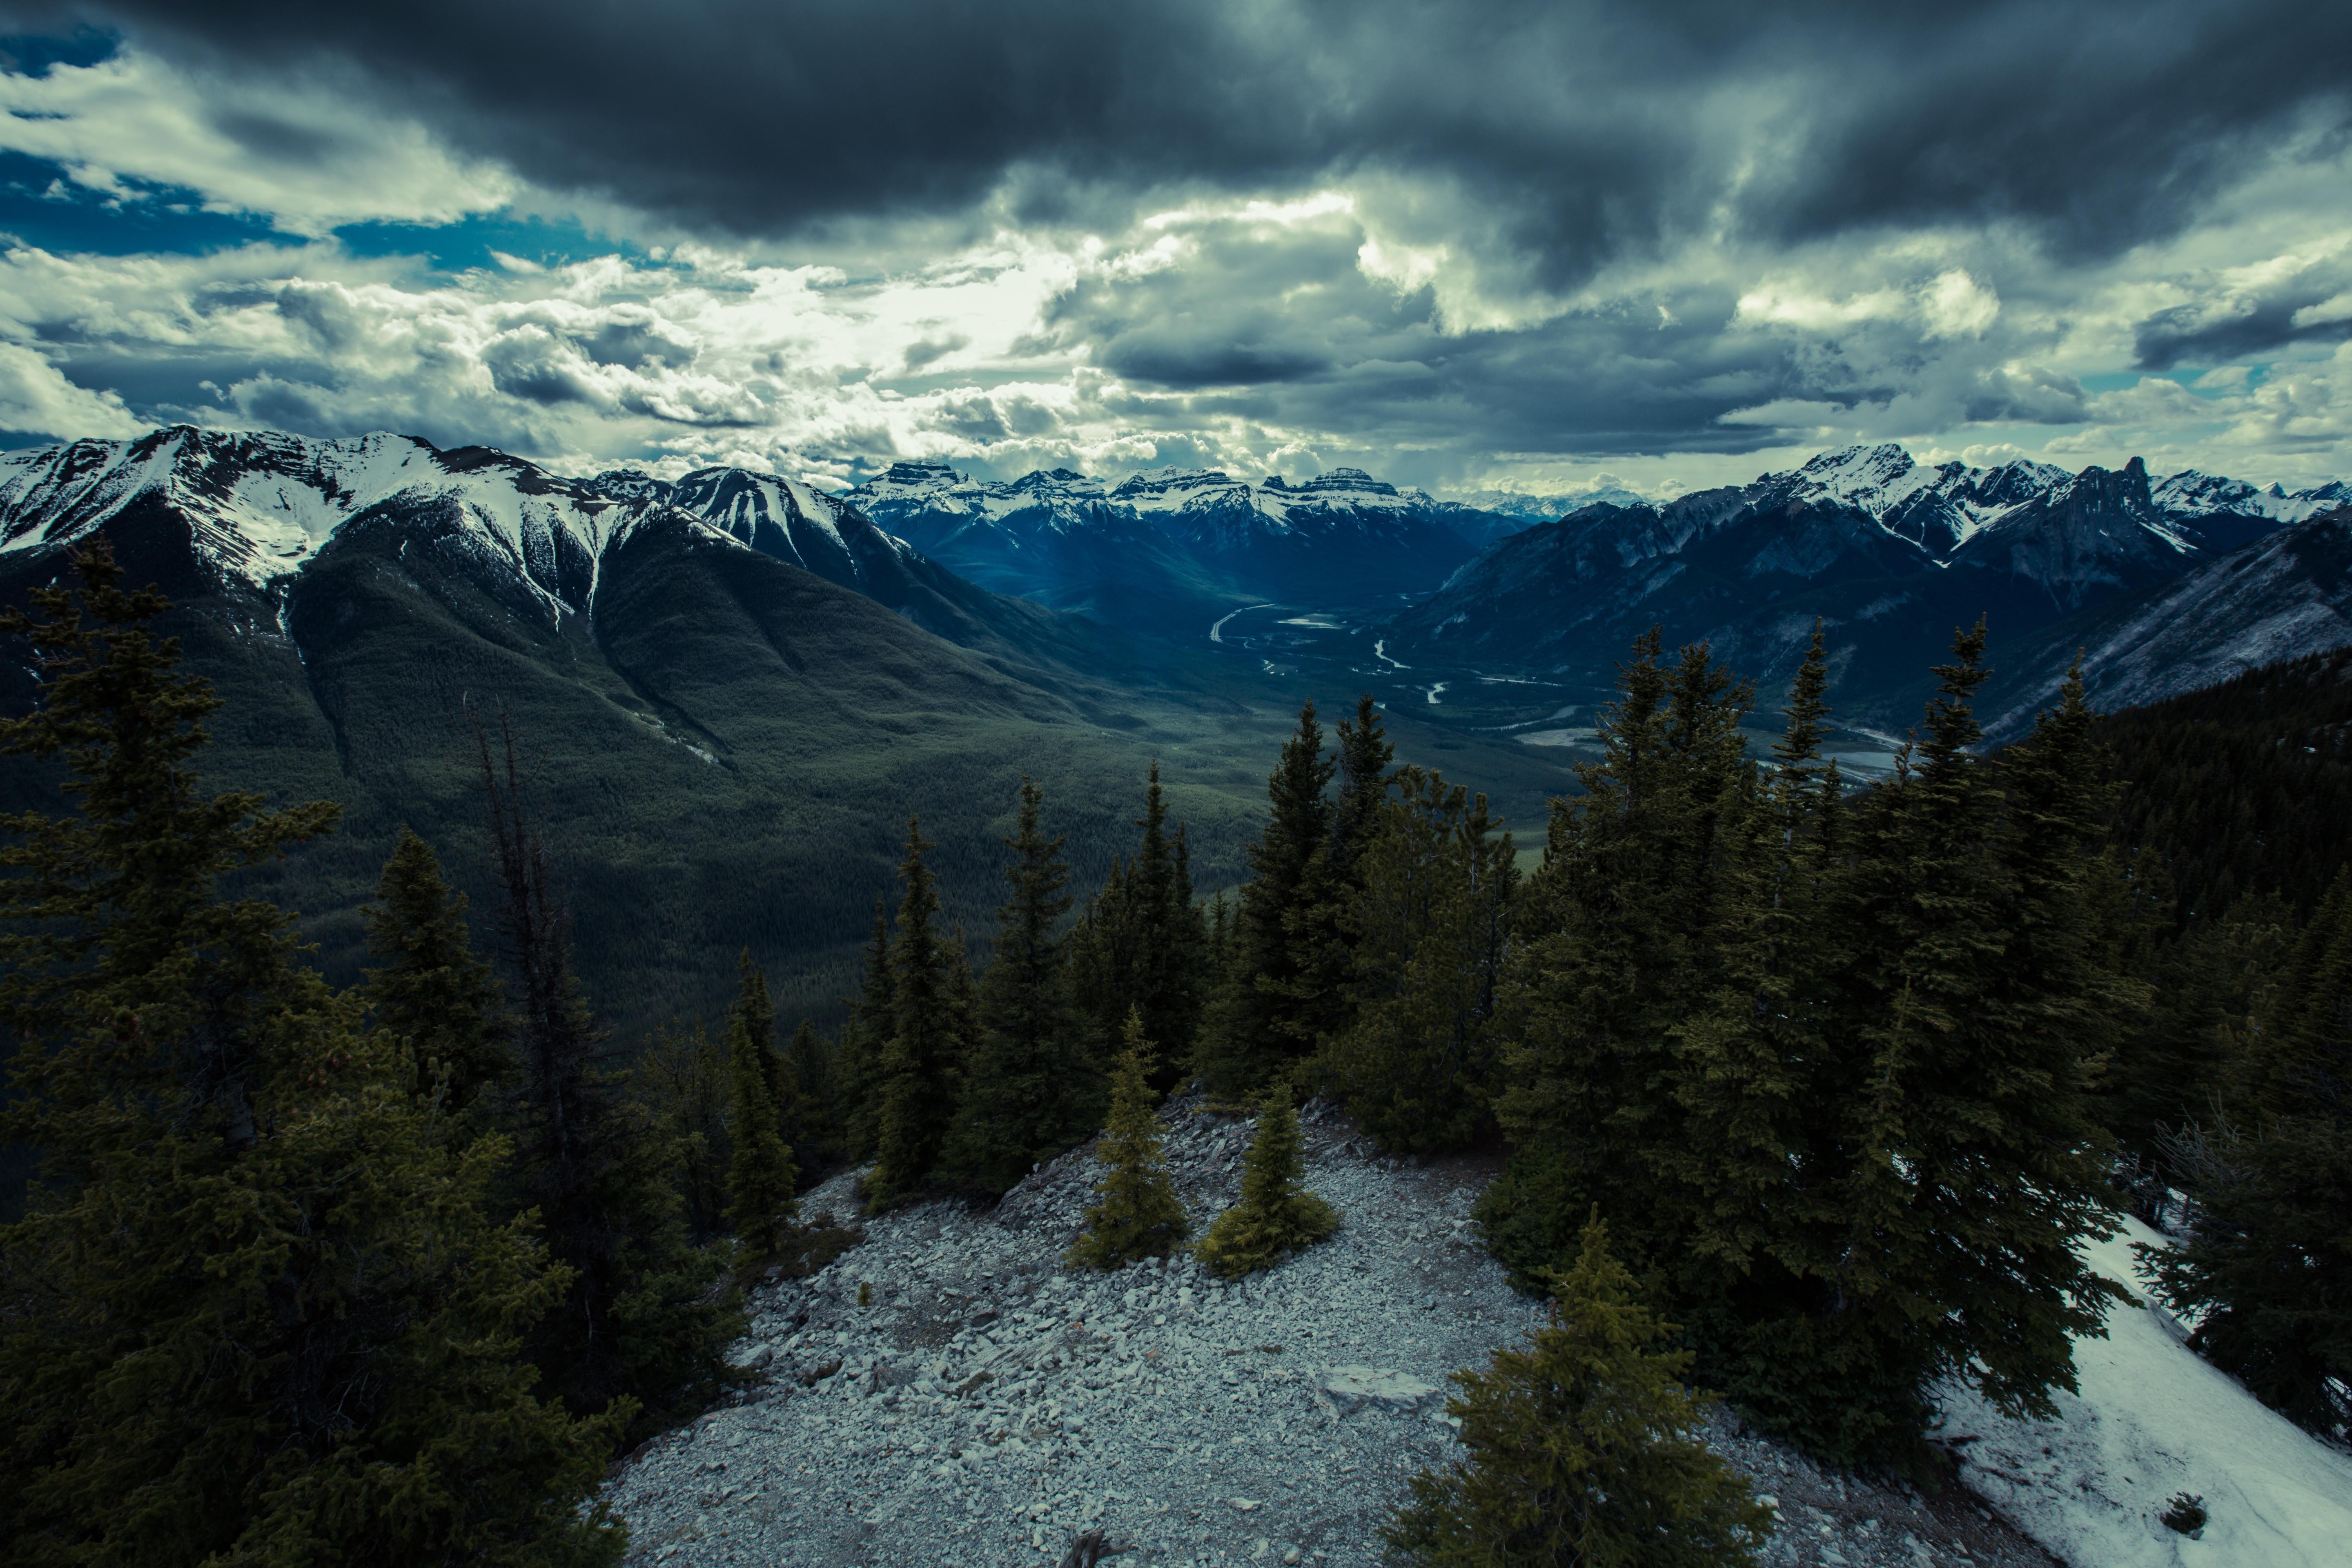 General 5760x3840 mountains landscape valley river pine trees overcast nature snowy peak clouds outdoors